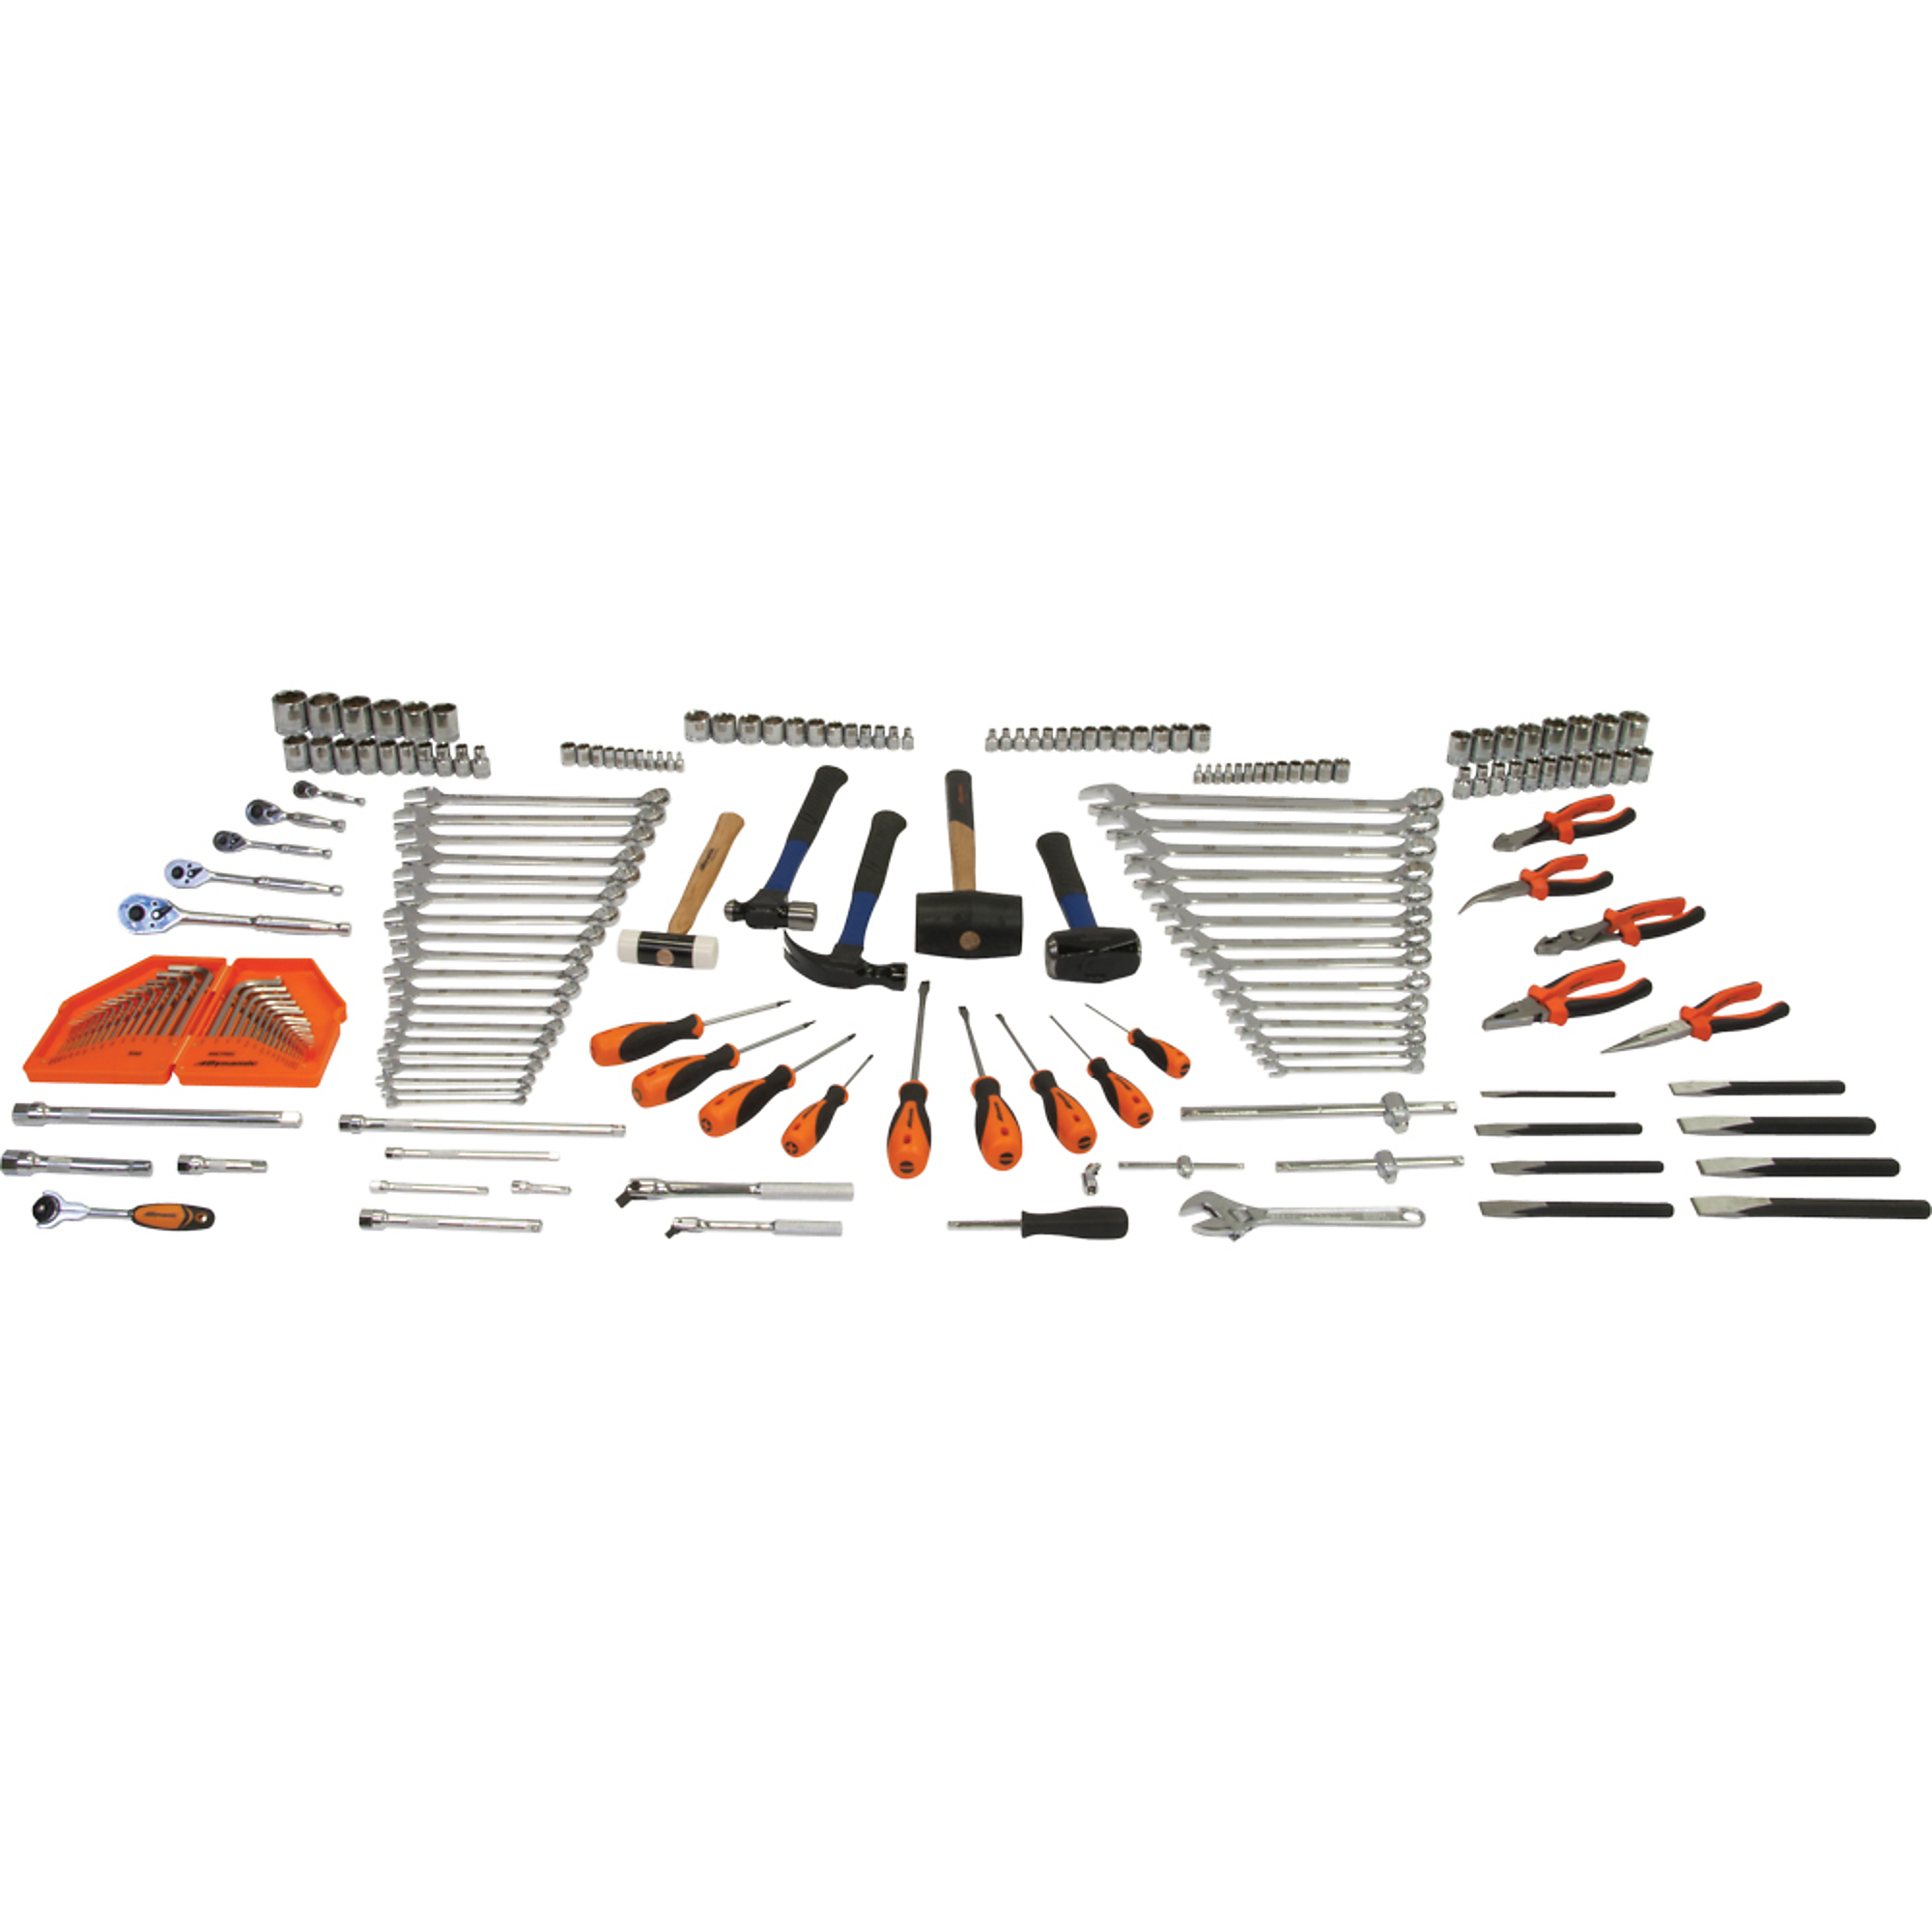 Dynamic Tools, 198 Piece Starter Master Set, Pieces (qty.) 198 Model D096003